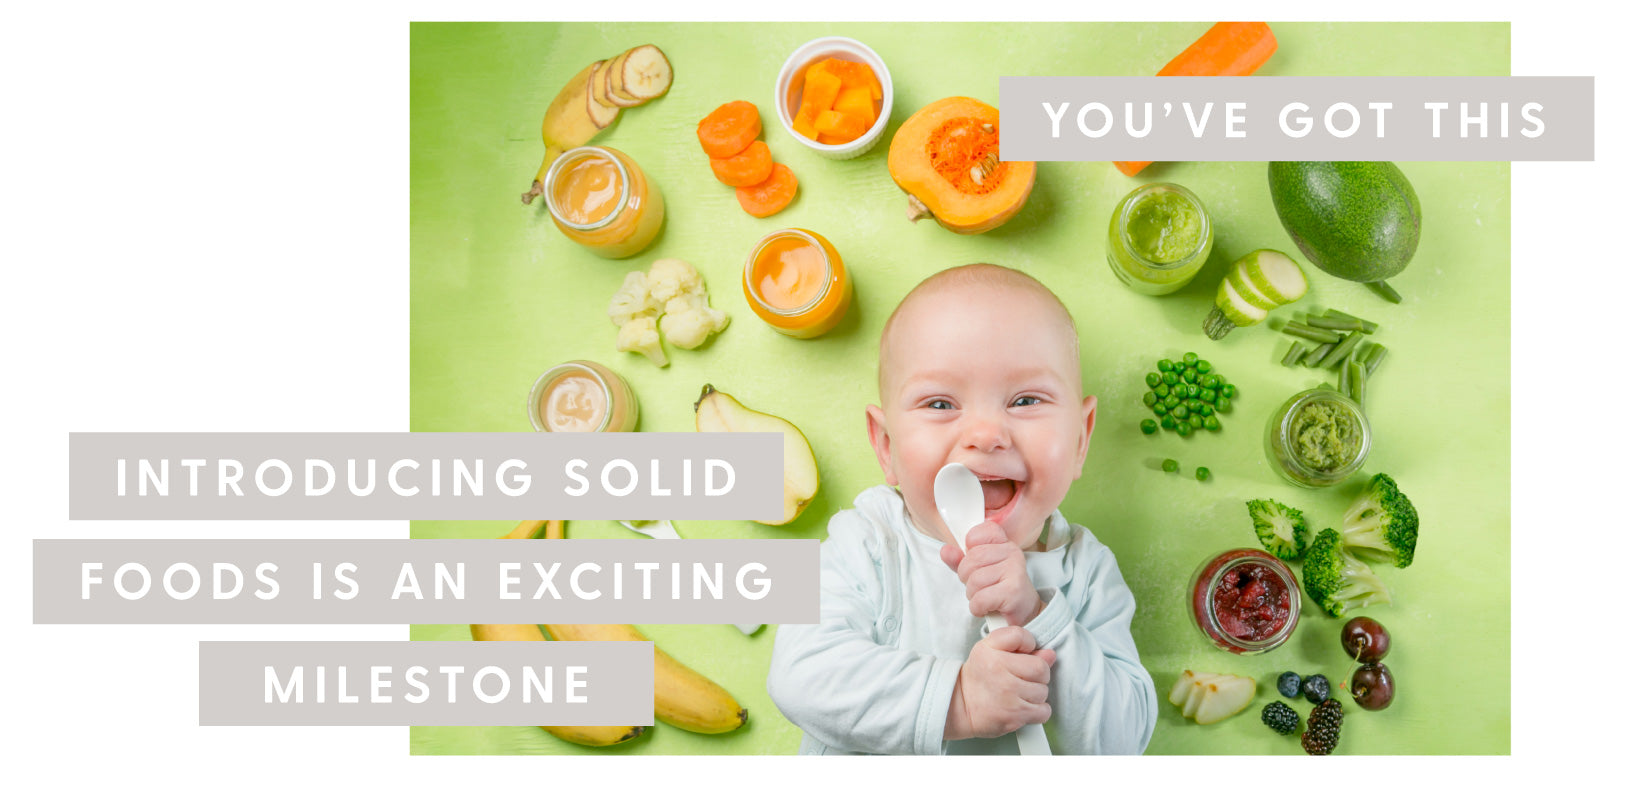 Introducing solid foods is an exciting milestone